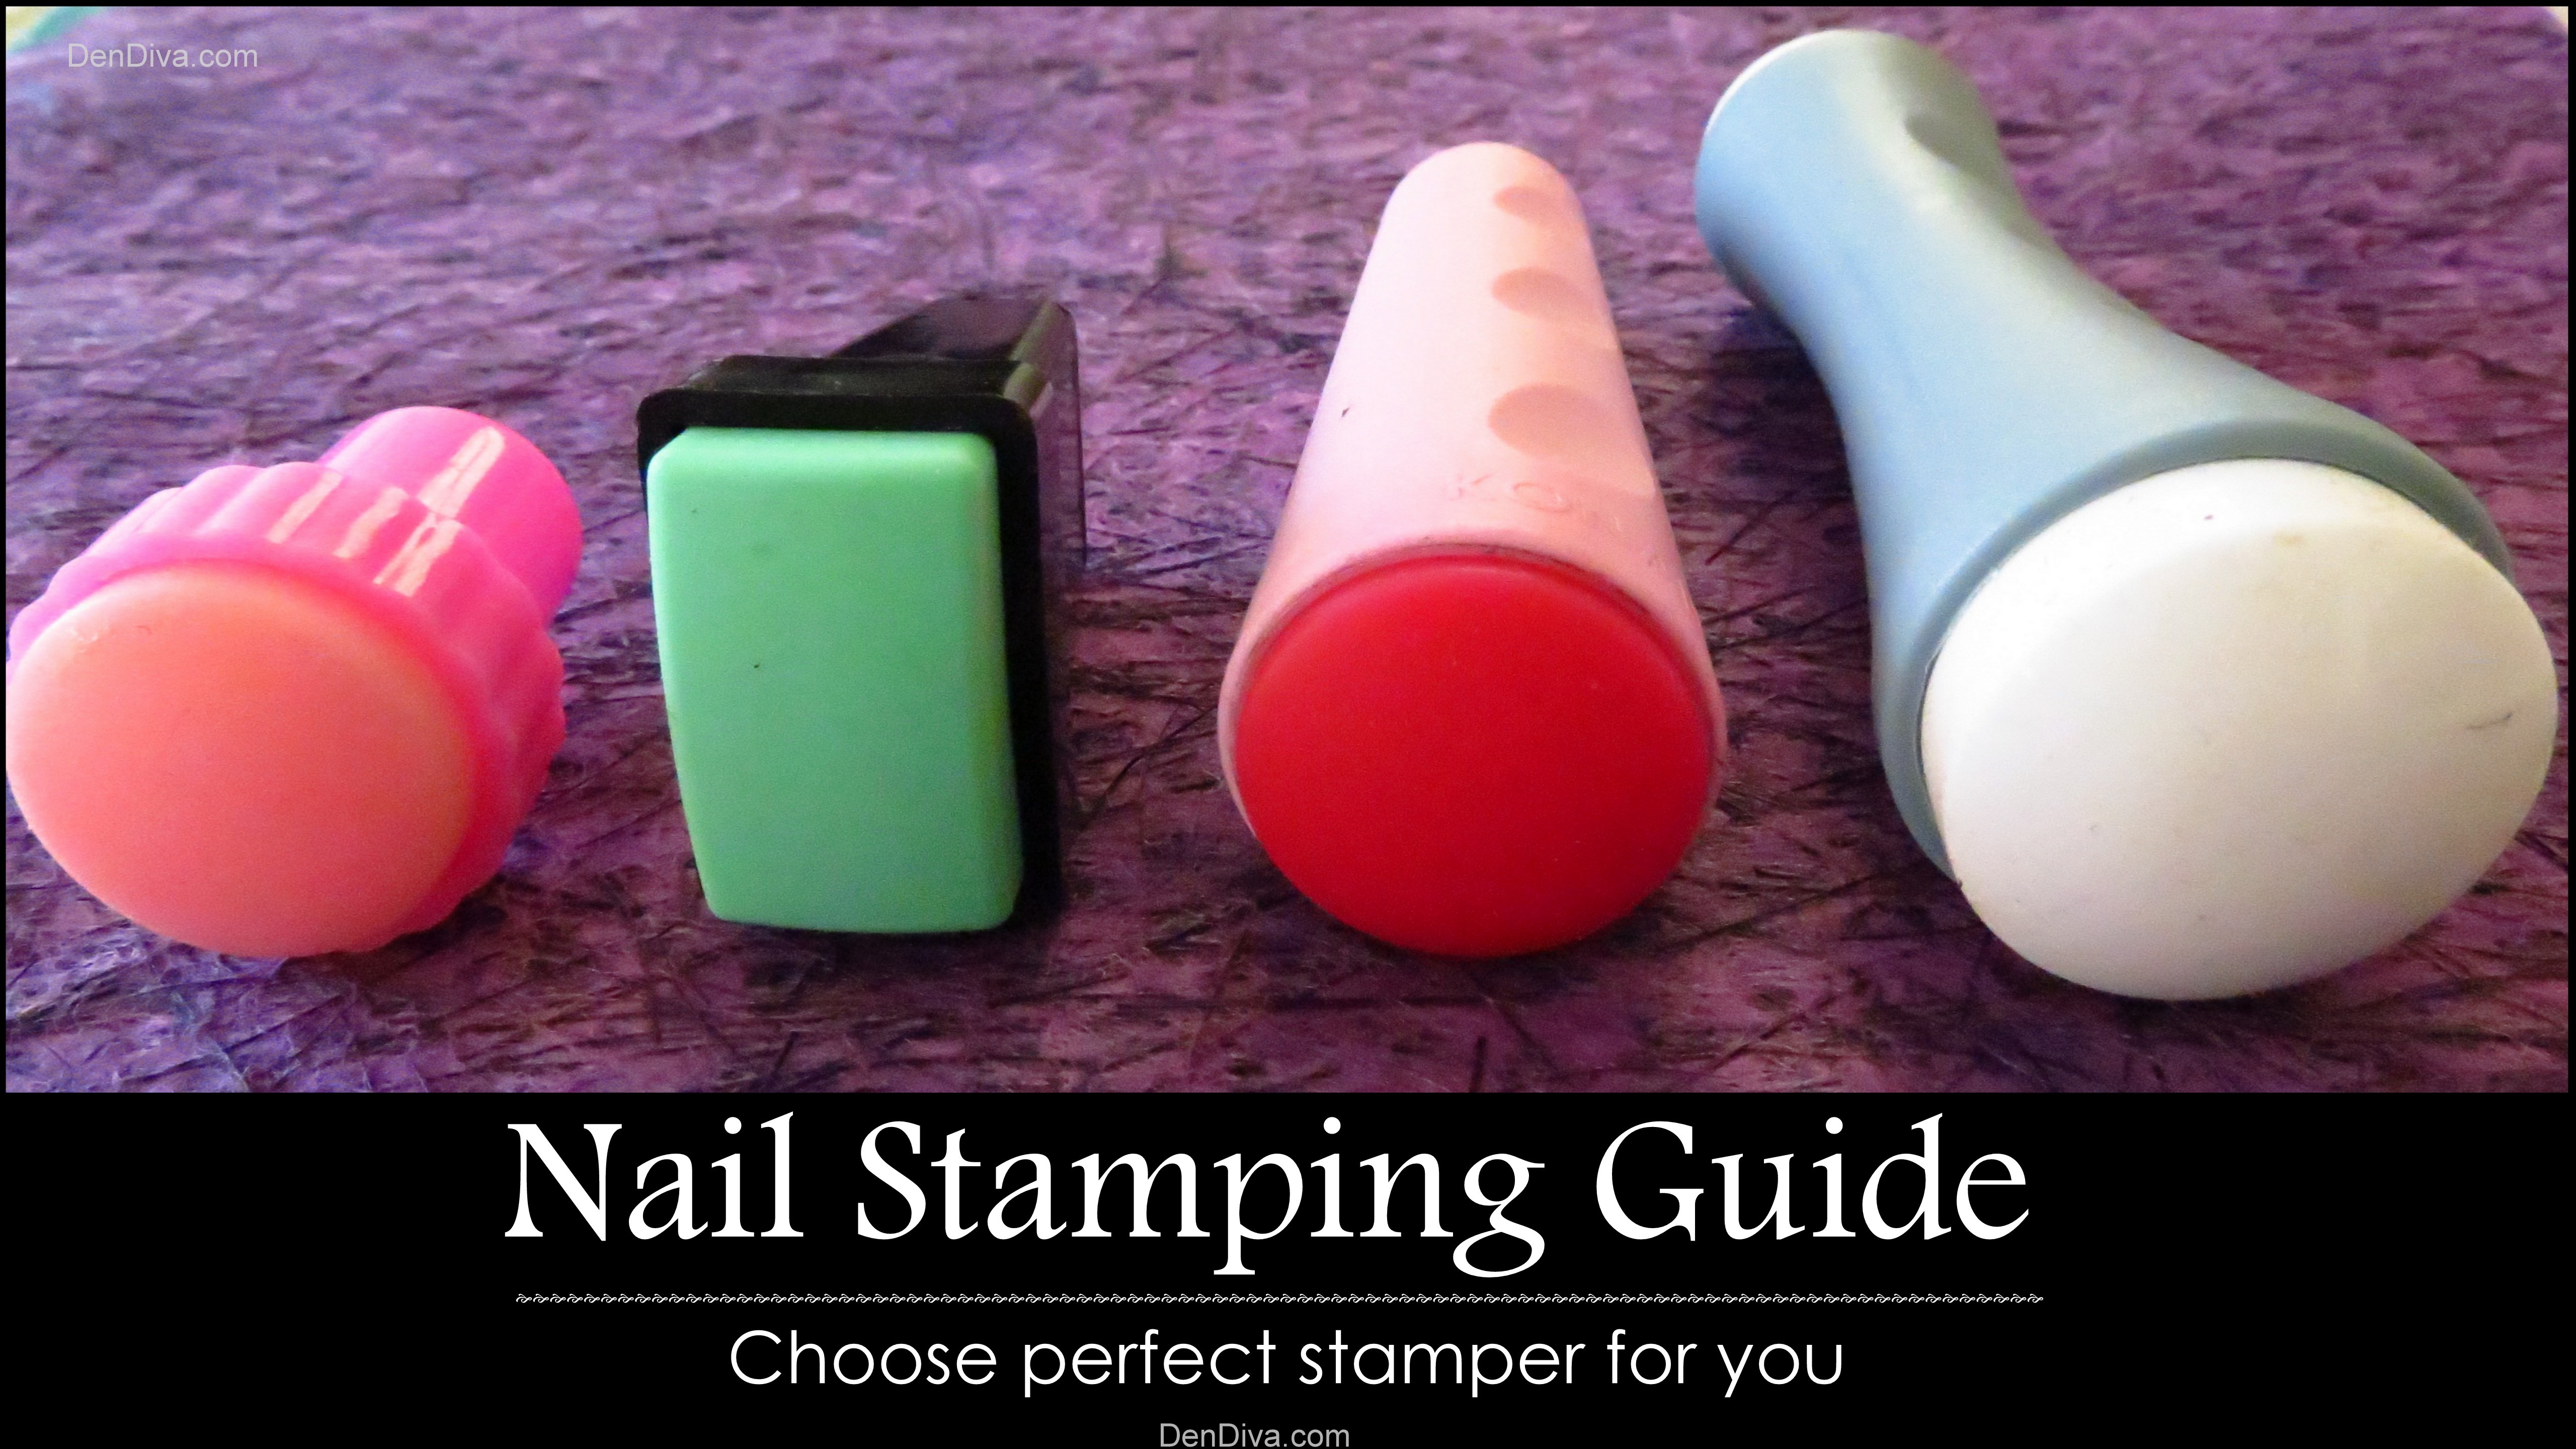 7. Troubleshooting Guide for Common Nail Stamper Issues - wide 5